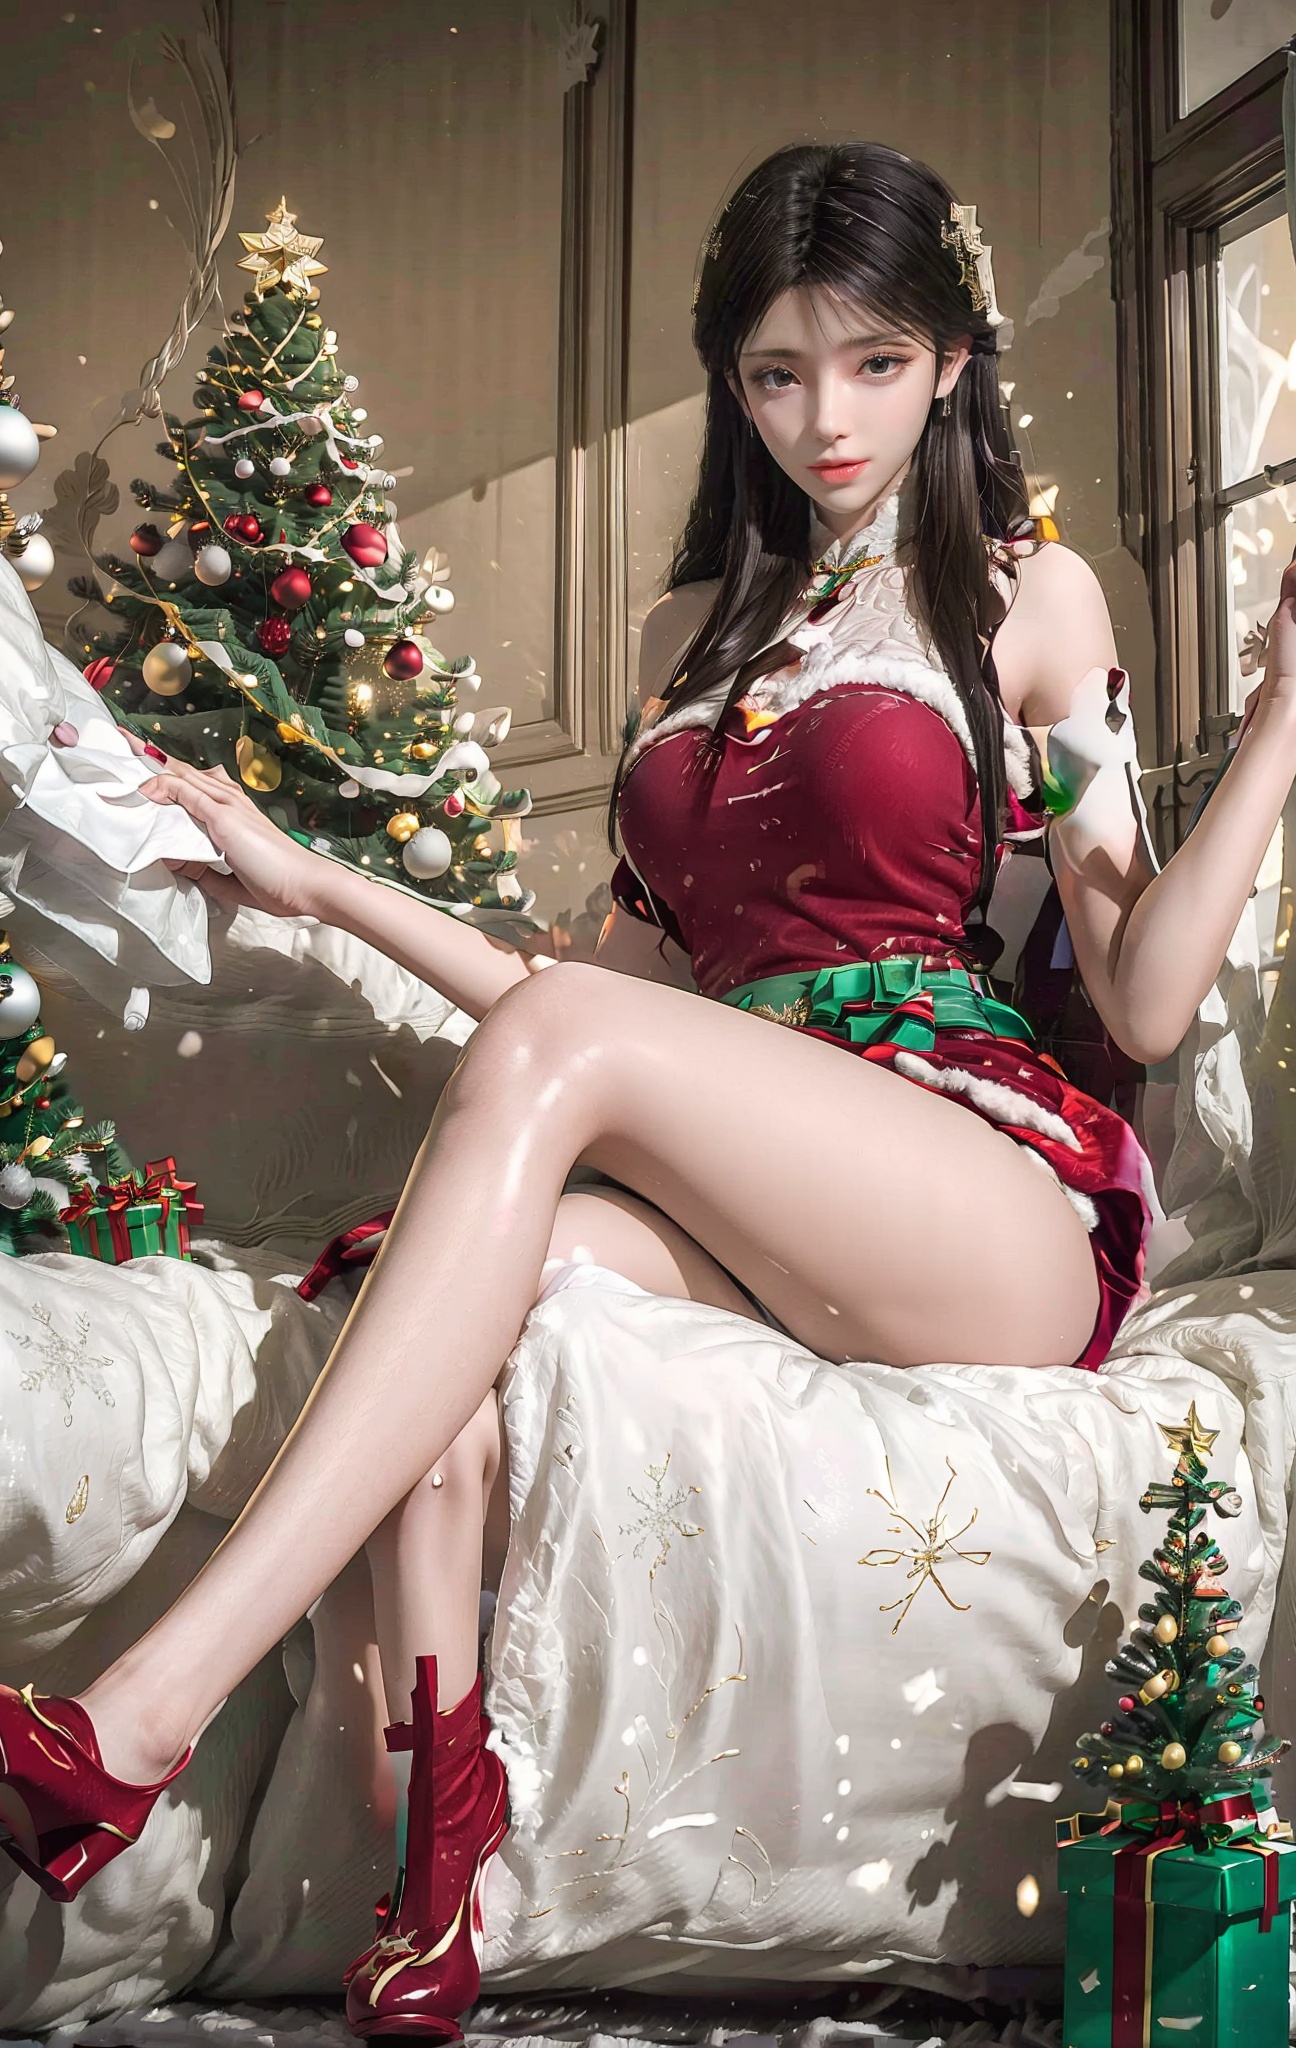 
1girl, fireplace, box, solo, thighs, gifts, gift boxes, high heels, indoor, Christmas tree, cross legs, look at
Observer, window, sit, brown.
Hair, side boobs, breasts, Christmas, wooden floor, long
Hair, food, curtains, light show.
Shoulders, jewelry, carpets, candles, earrings, black stockings, red
Nails, nail polish, sofas, chairs, skirts, tables, full
Body, carpet, sleeveless, Christmas decorations, big breasts, lips